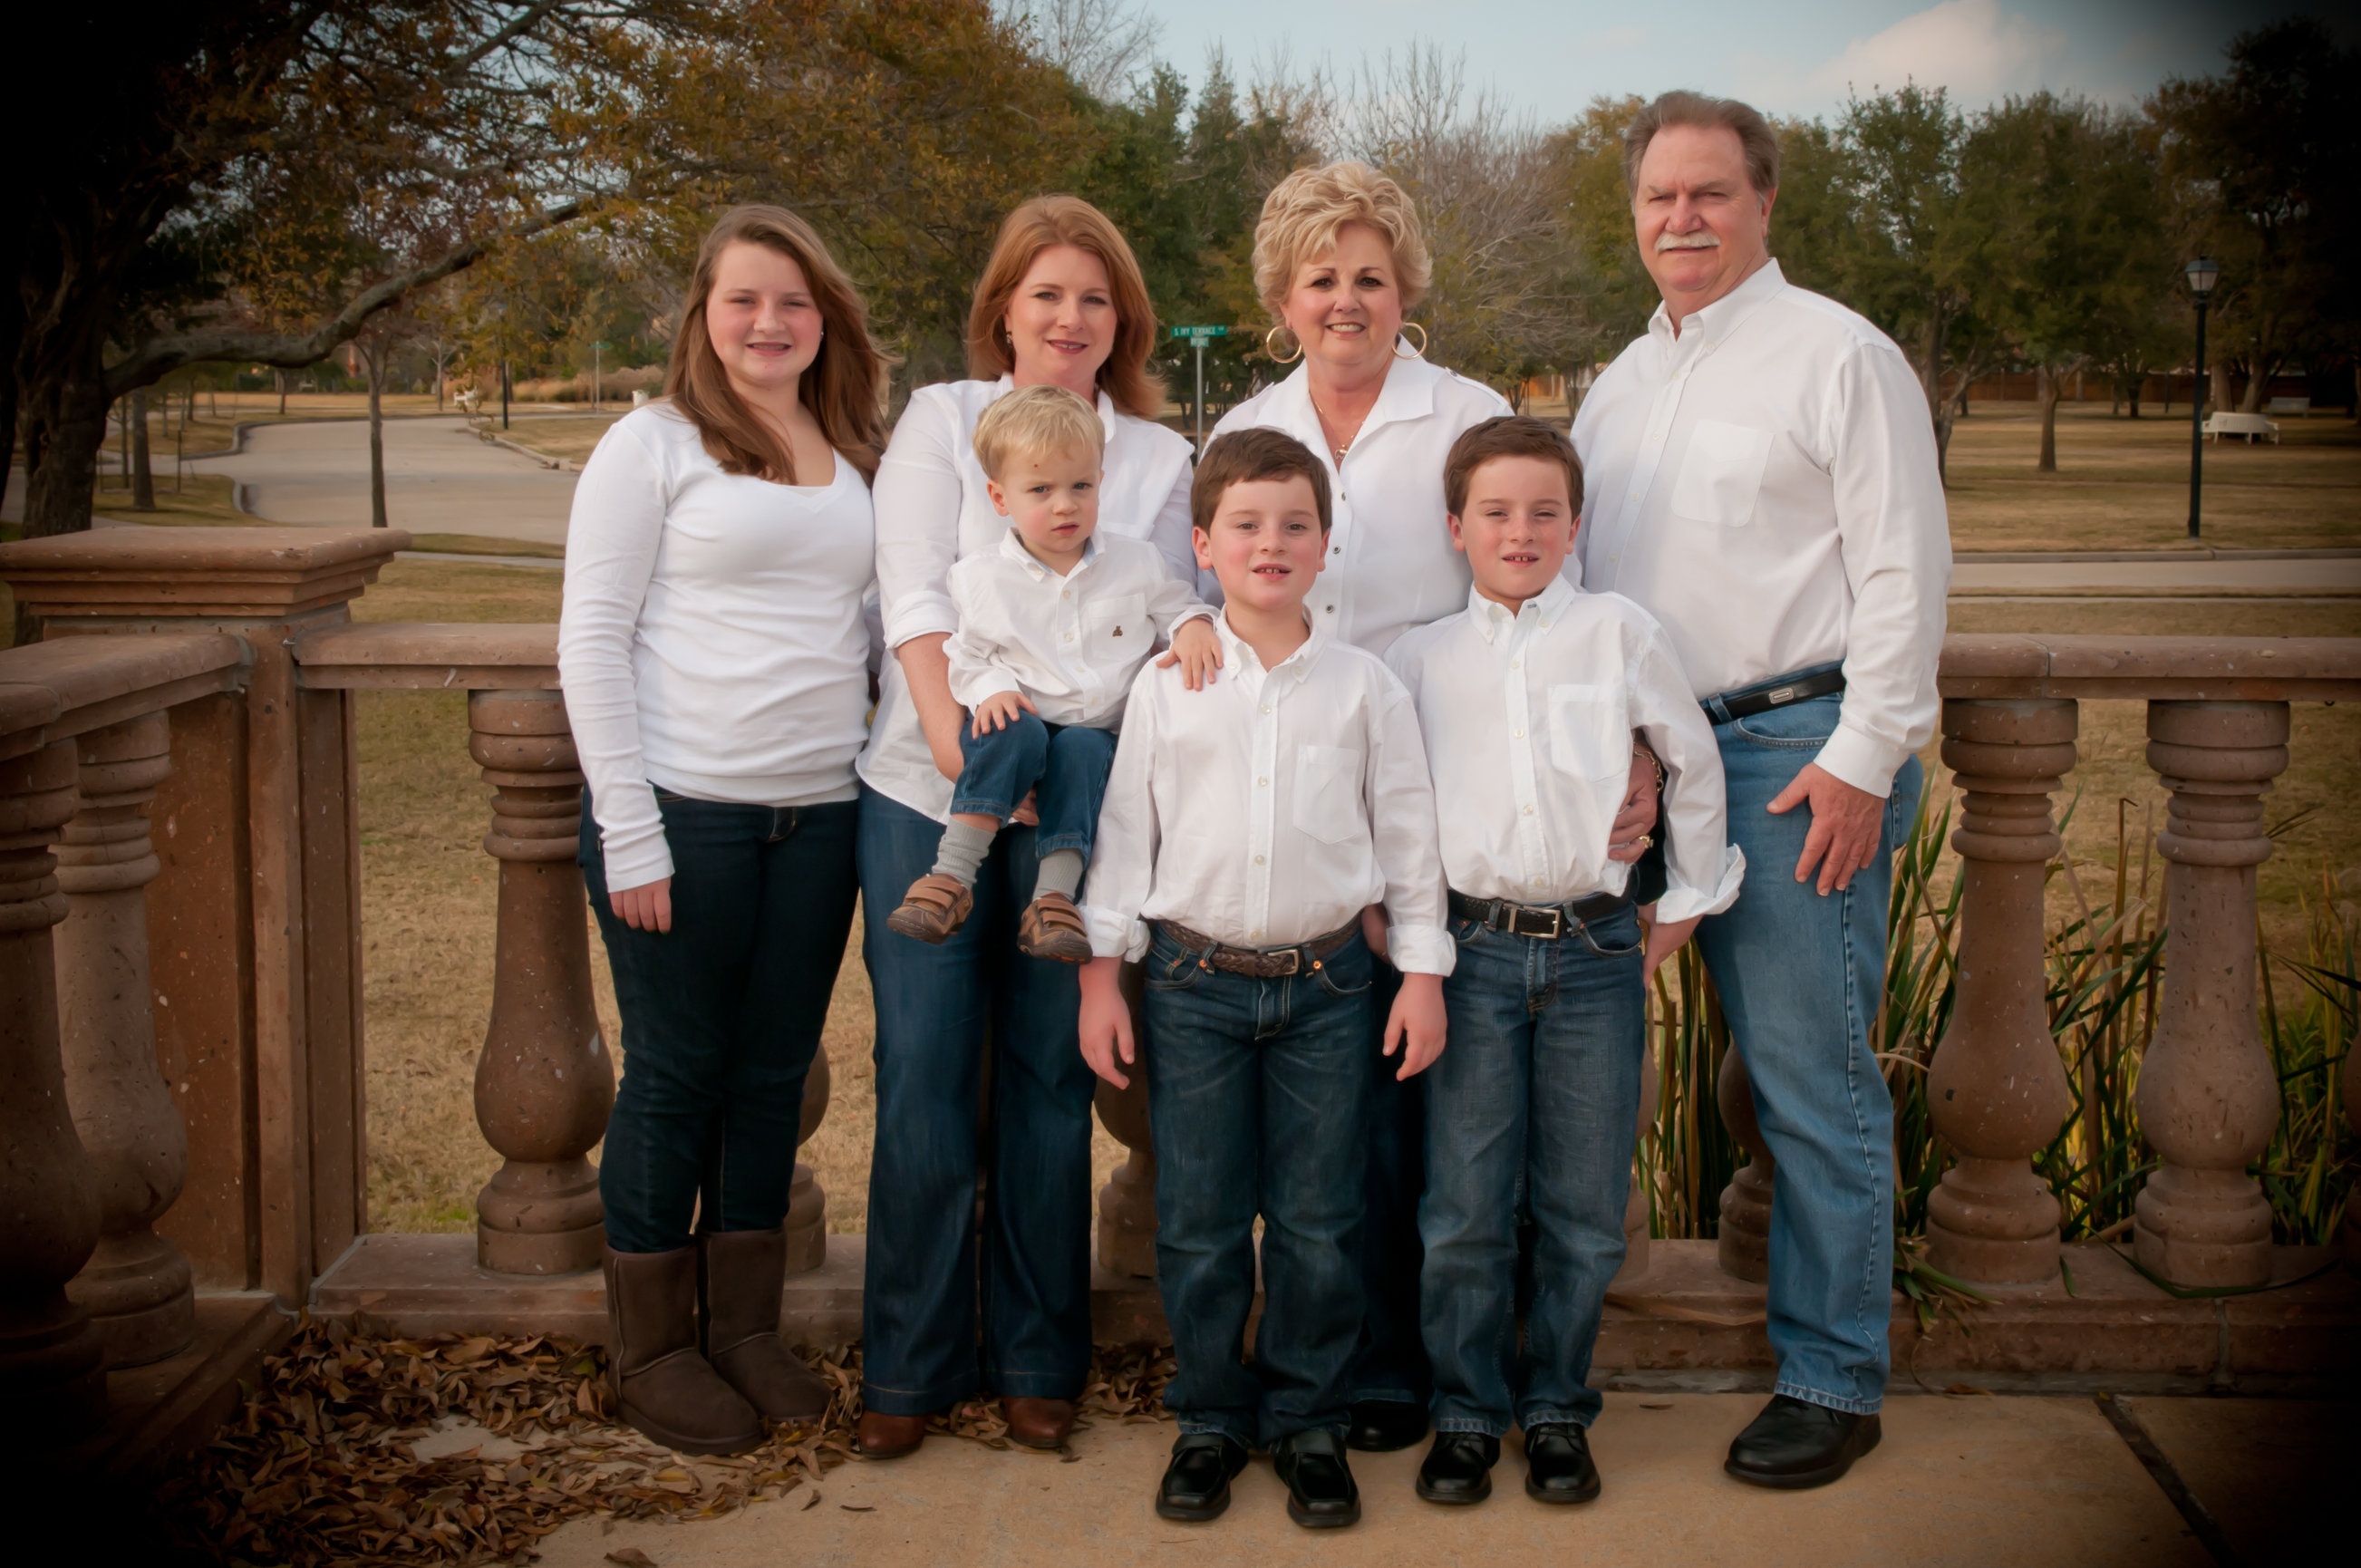 Houston Family Portrait Gallery Your Best Shot Photography